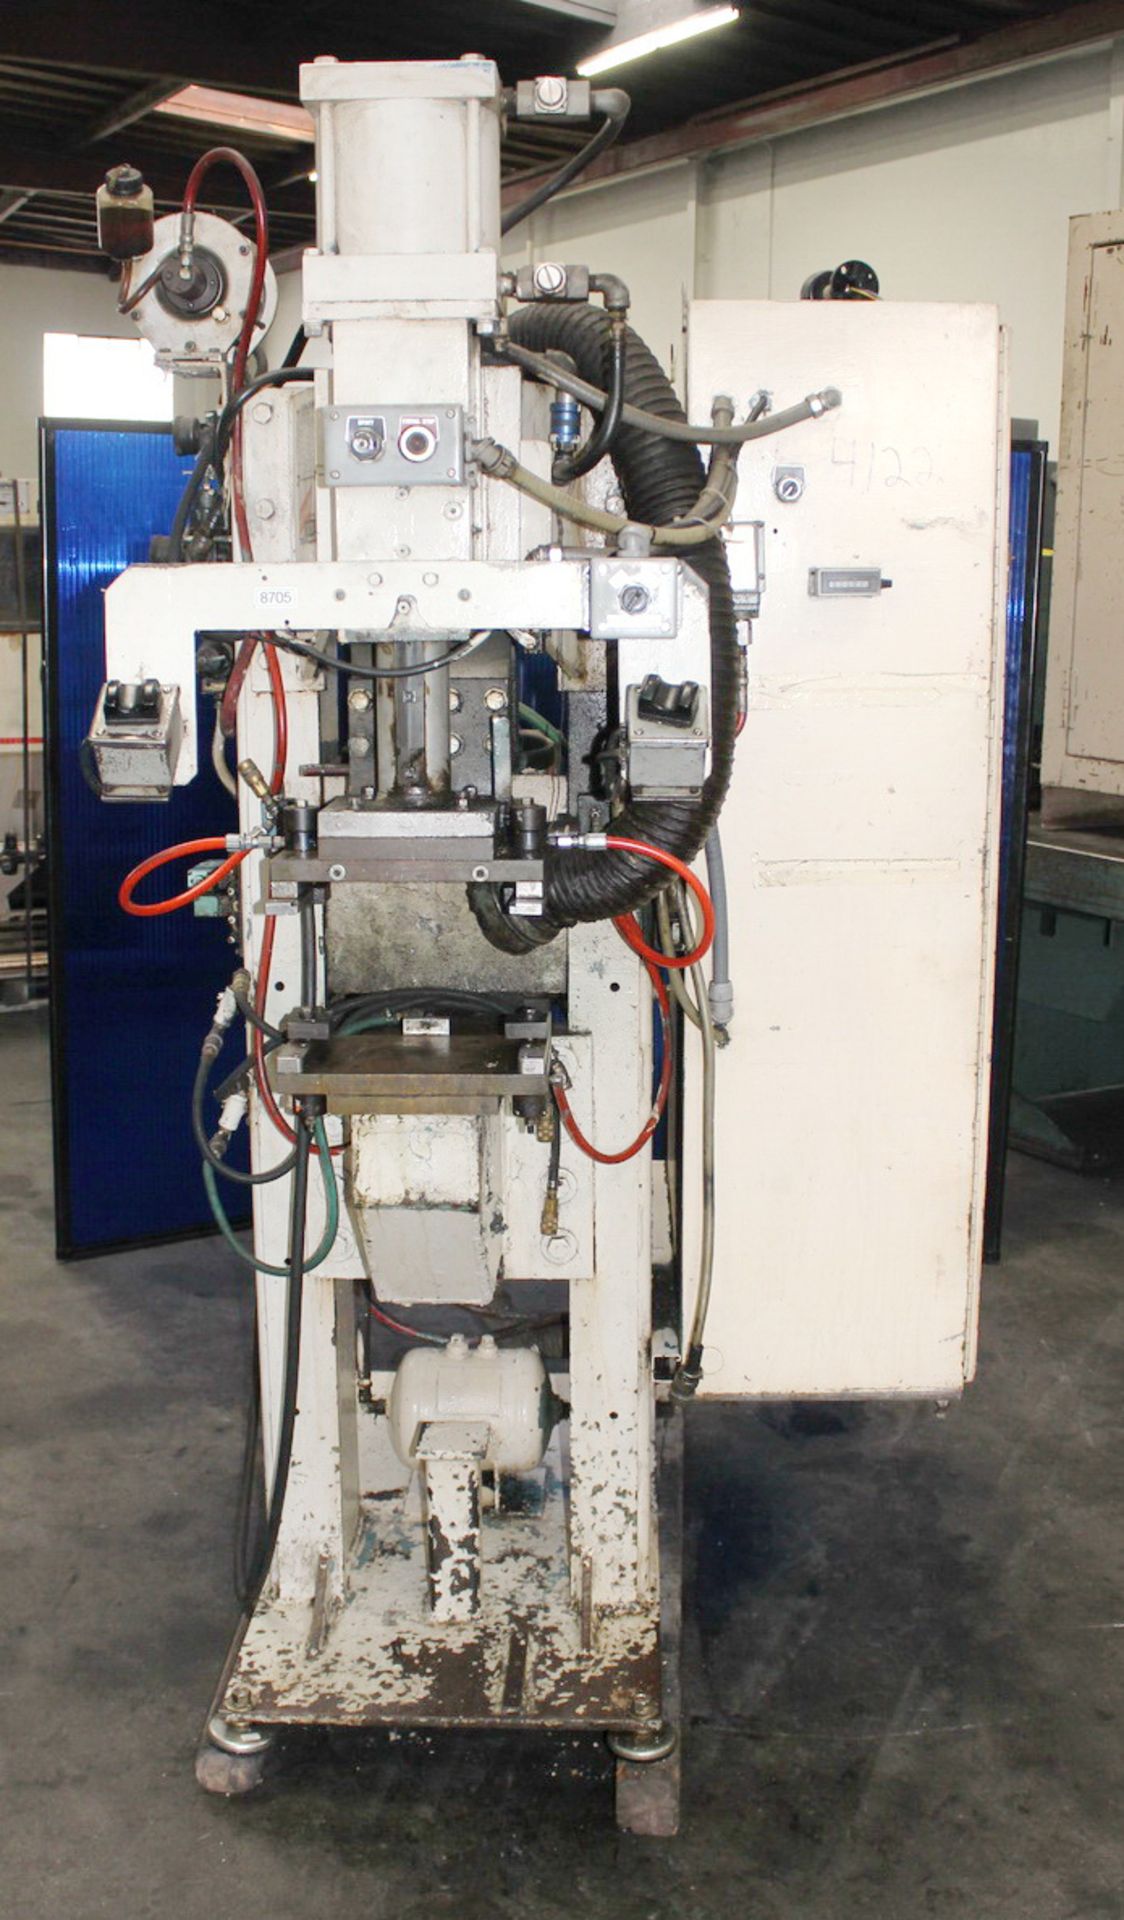 Hoffman Press Type Spot Welder 125 KVA x 14''. LOADING FEE FOR THIS LOT: $150 - Image 2 of 18